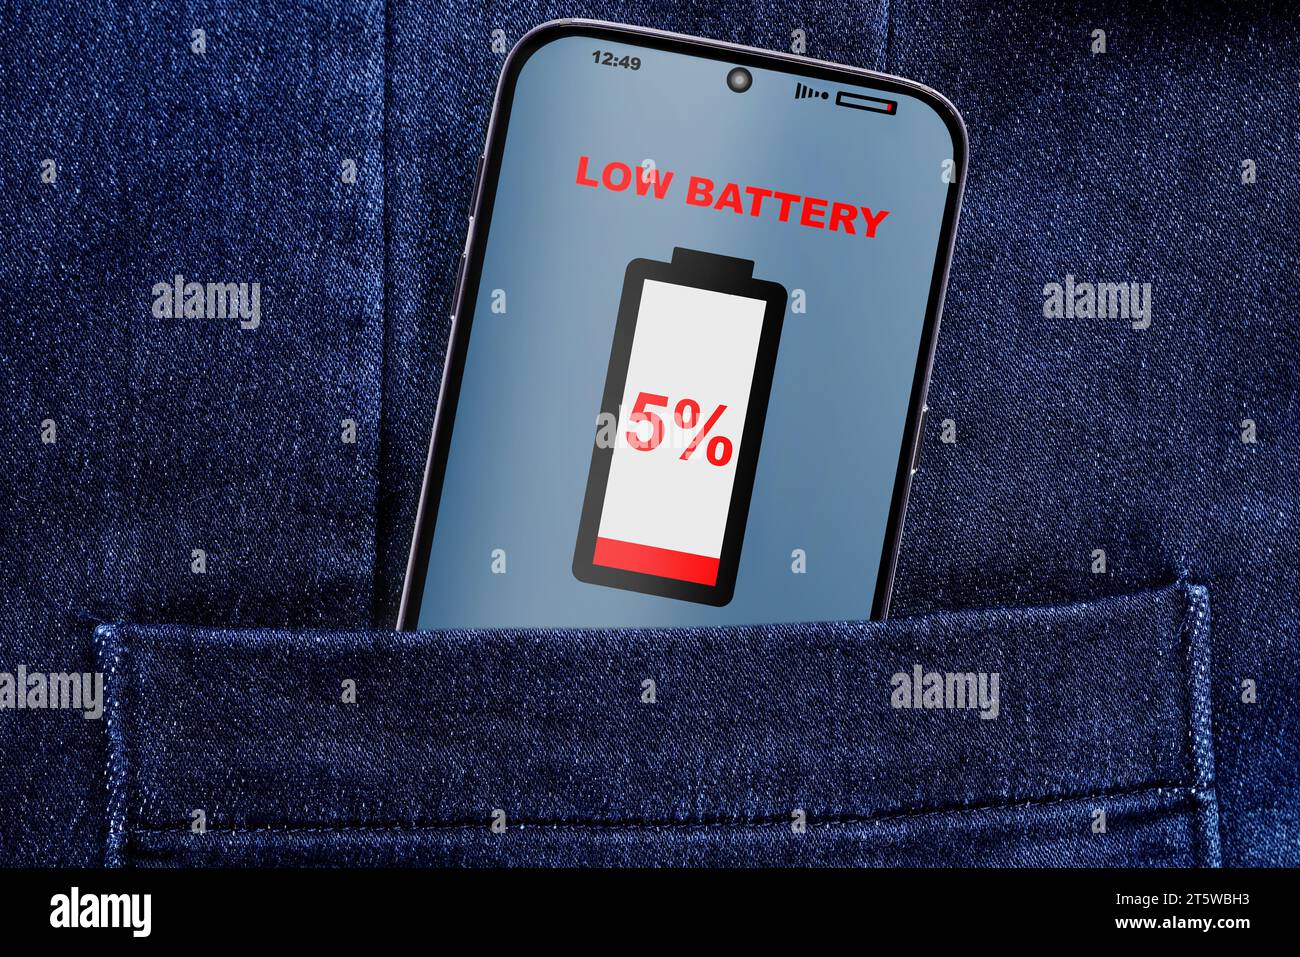 Low battery. Stock Photo